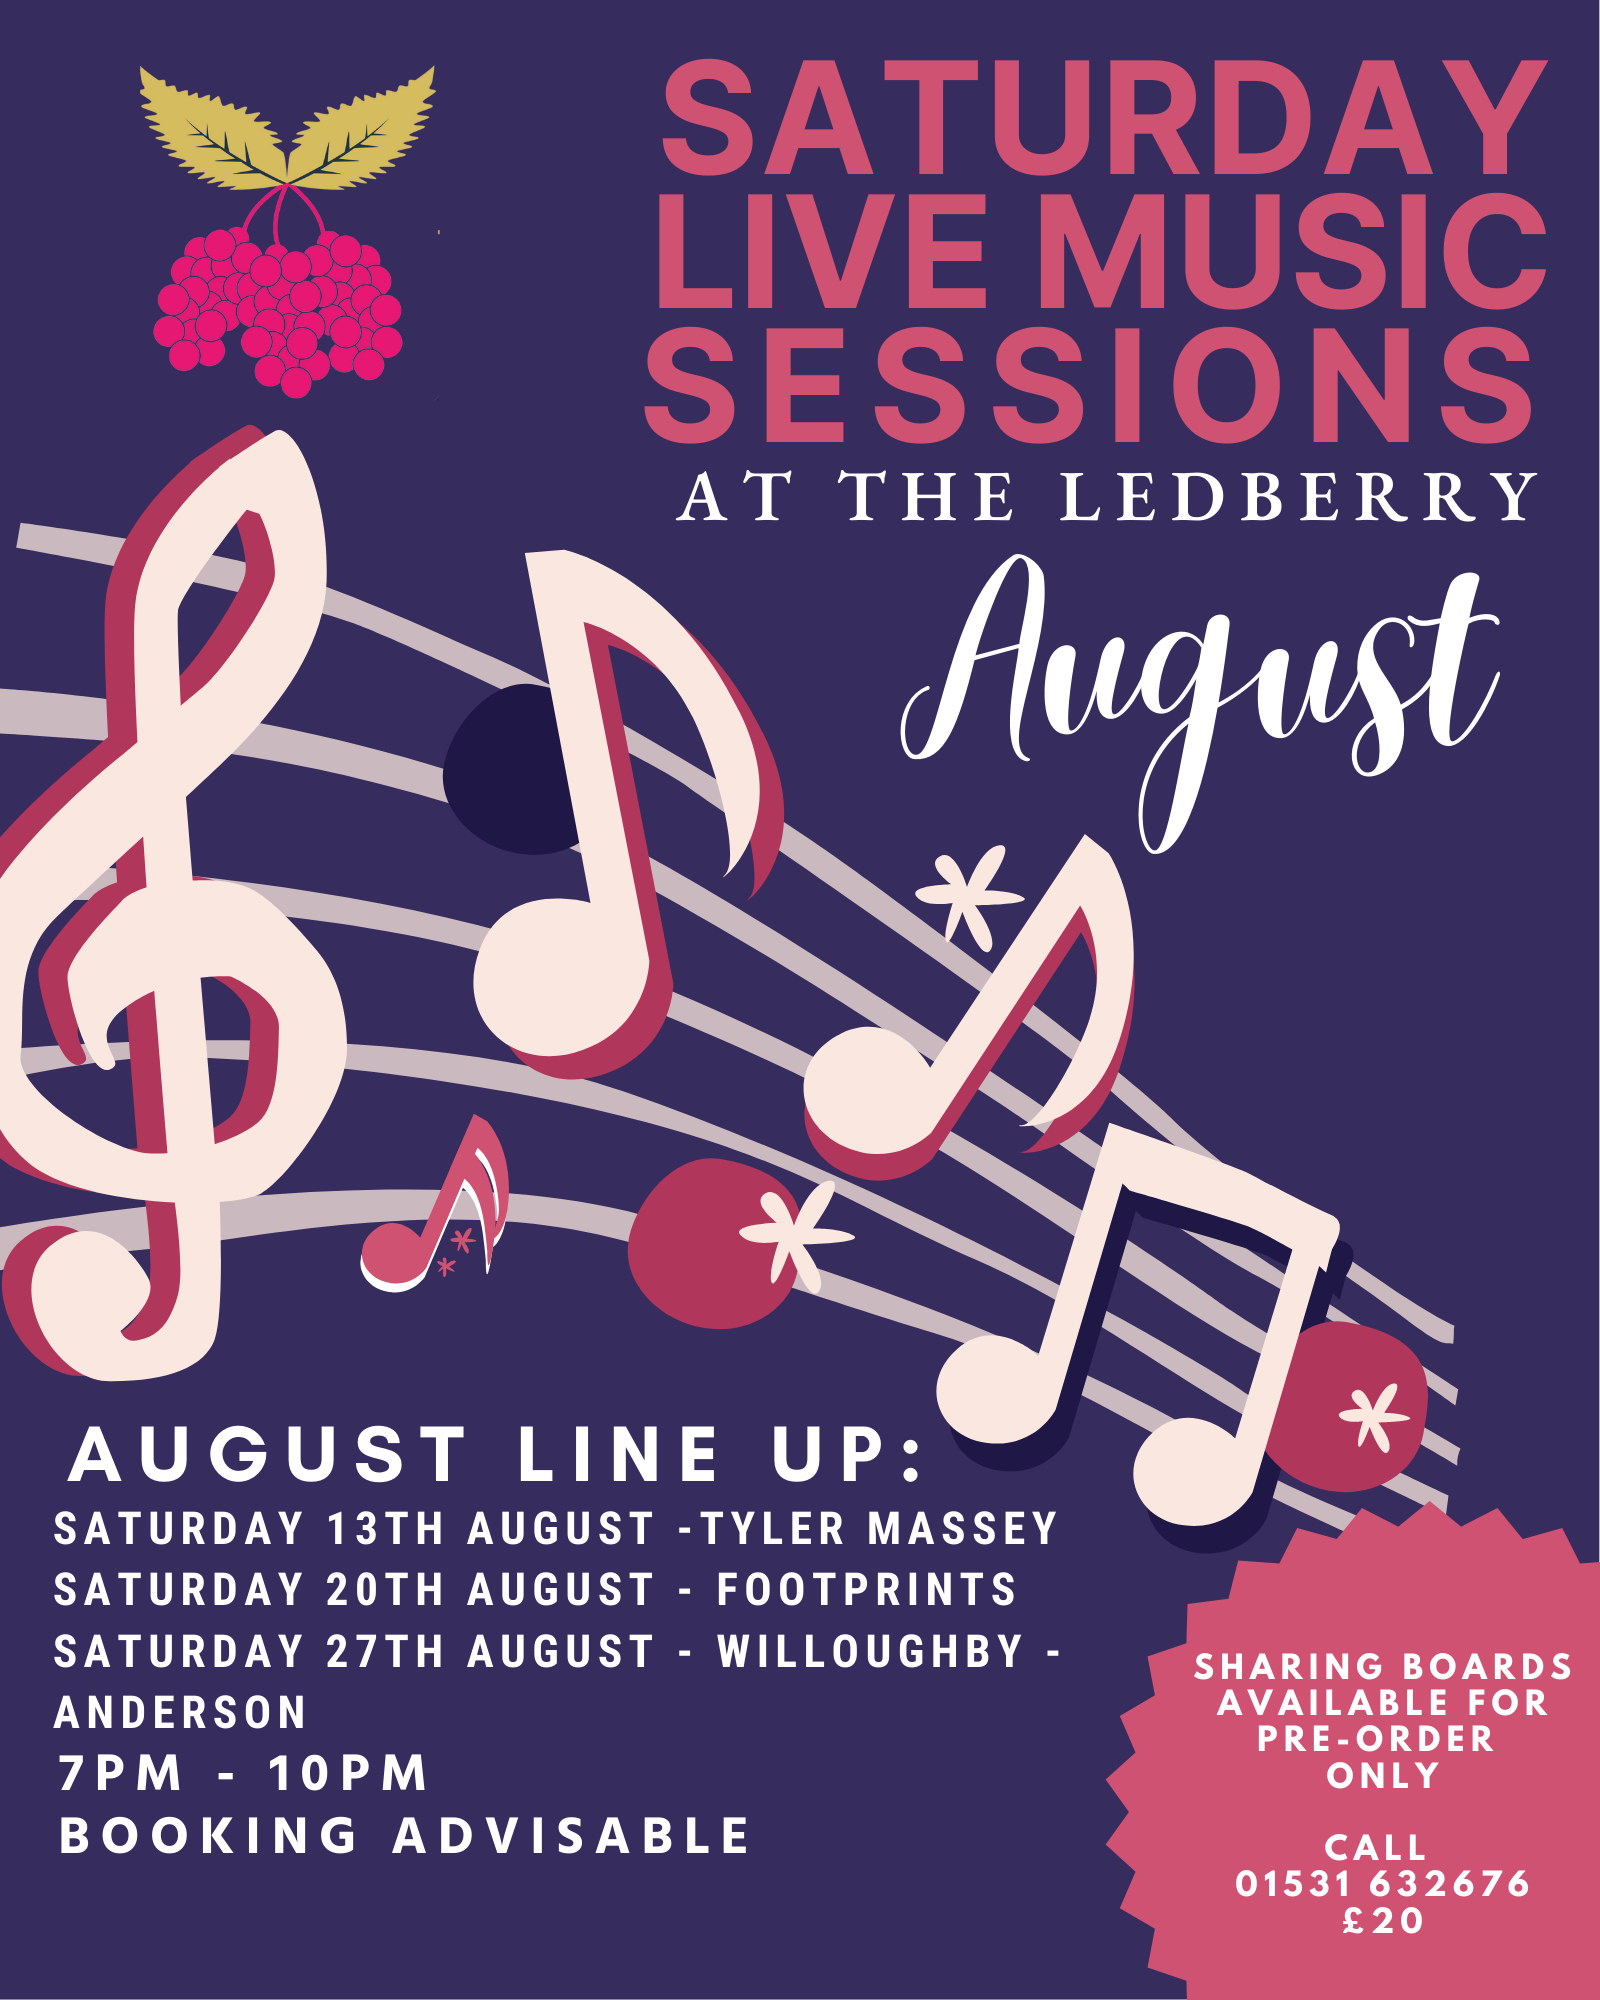 August Live Music Summer Saturdays at The Ledberry